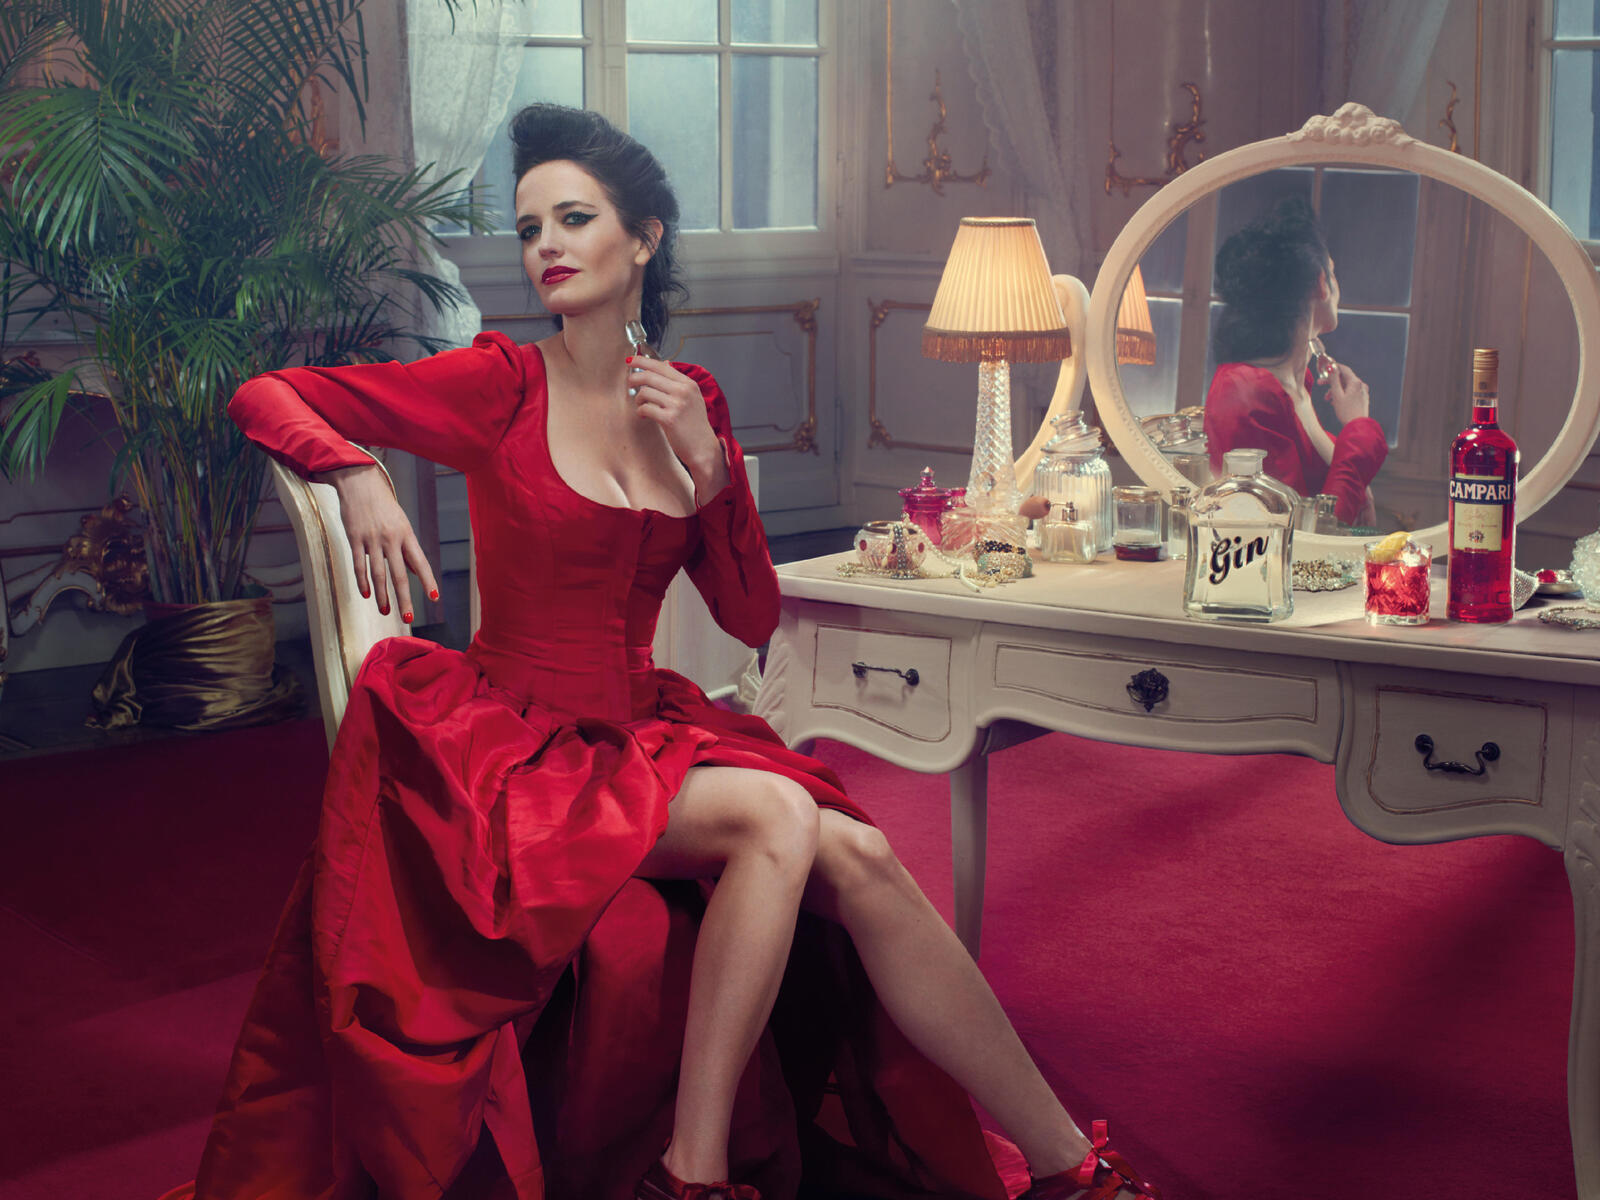 Free photo Eva Green sits in a red dress at a table with a mirror